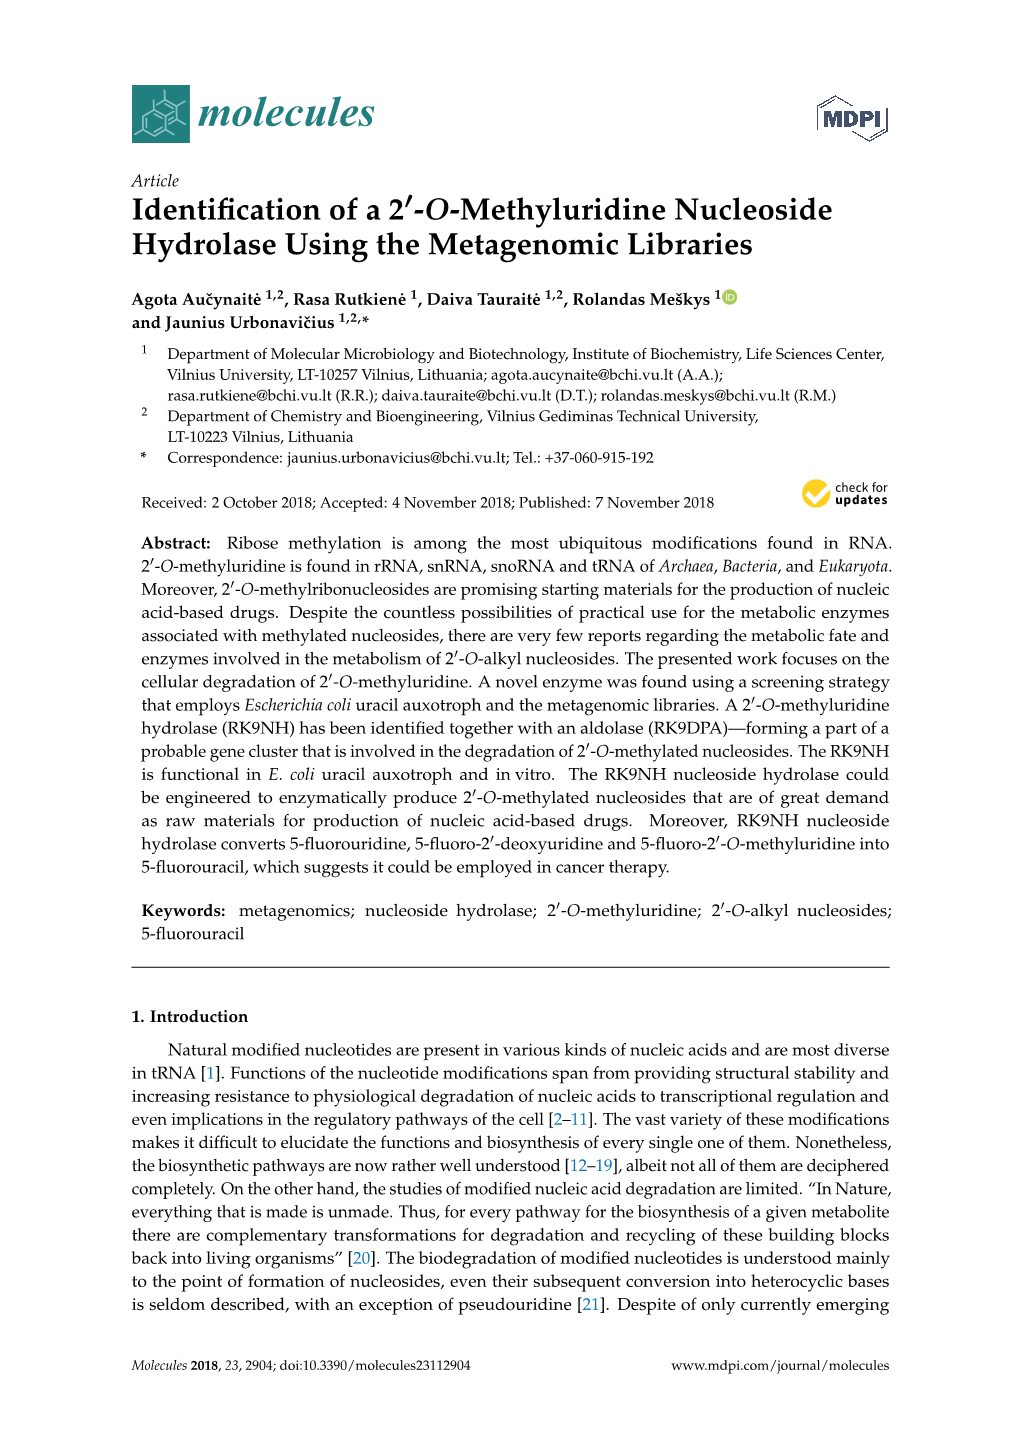 Identification of a 2-O-Methyluridine Nucleoside Hydrolase Using the Metagenomic Libraries